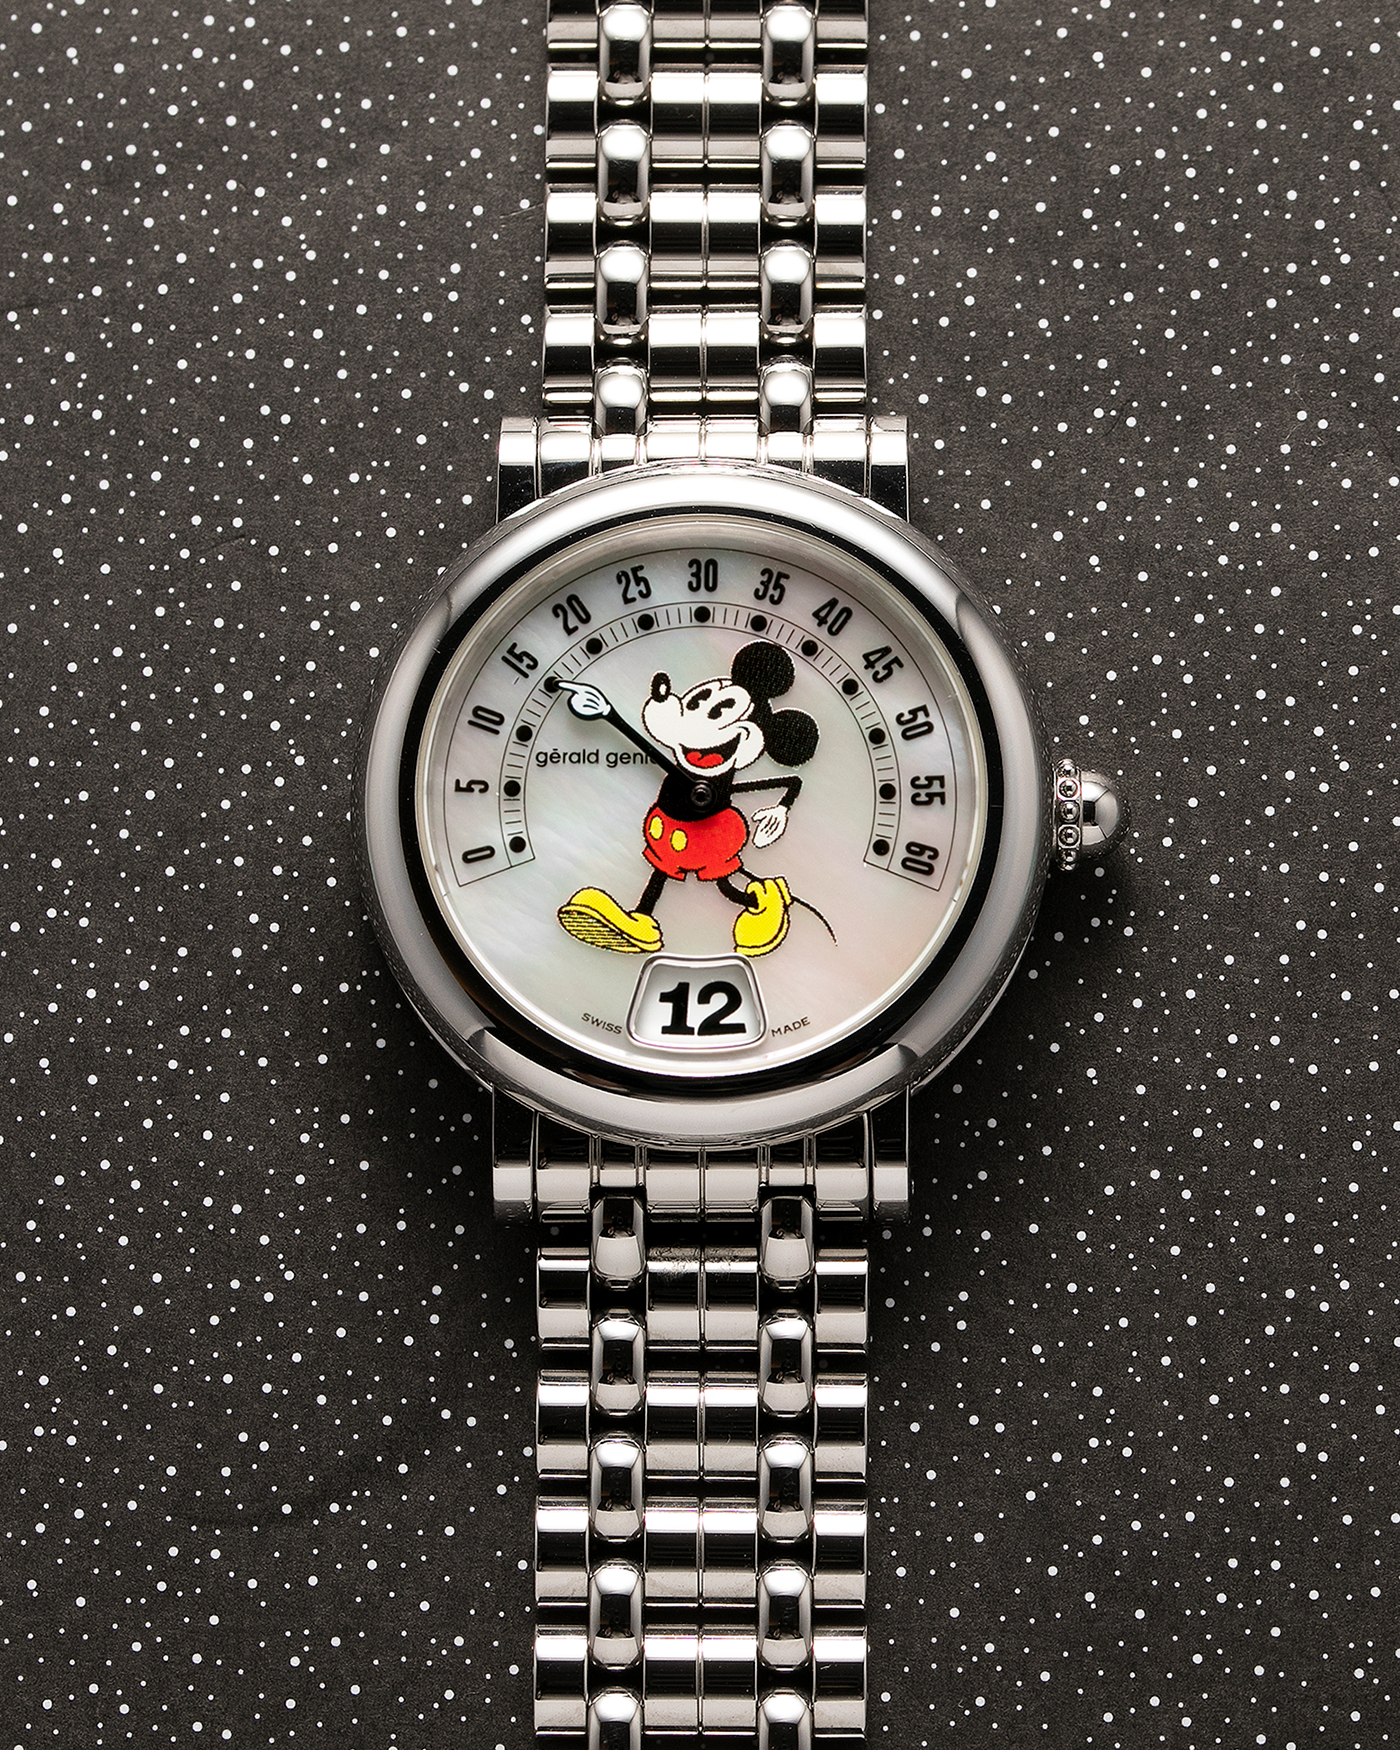 Brand: Gerald Genta Year: 1990’s Model: Ref. 3632G Retro “Mickey Mouse” Material: Stainless Steel case, Mother of Pearl dial Movement: Cal. ETA 2892A2, Self-Winding Case Diameter: 36mm Bracelet/Strap: Gerald Genta Stainless Steel Bracelet with Genta Signed Clasp